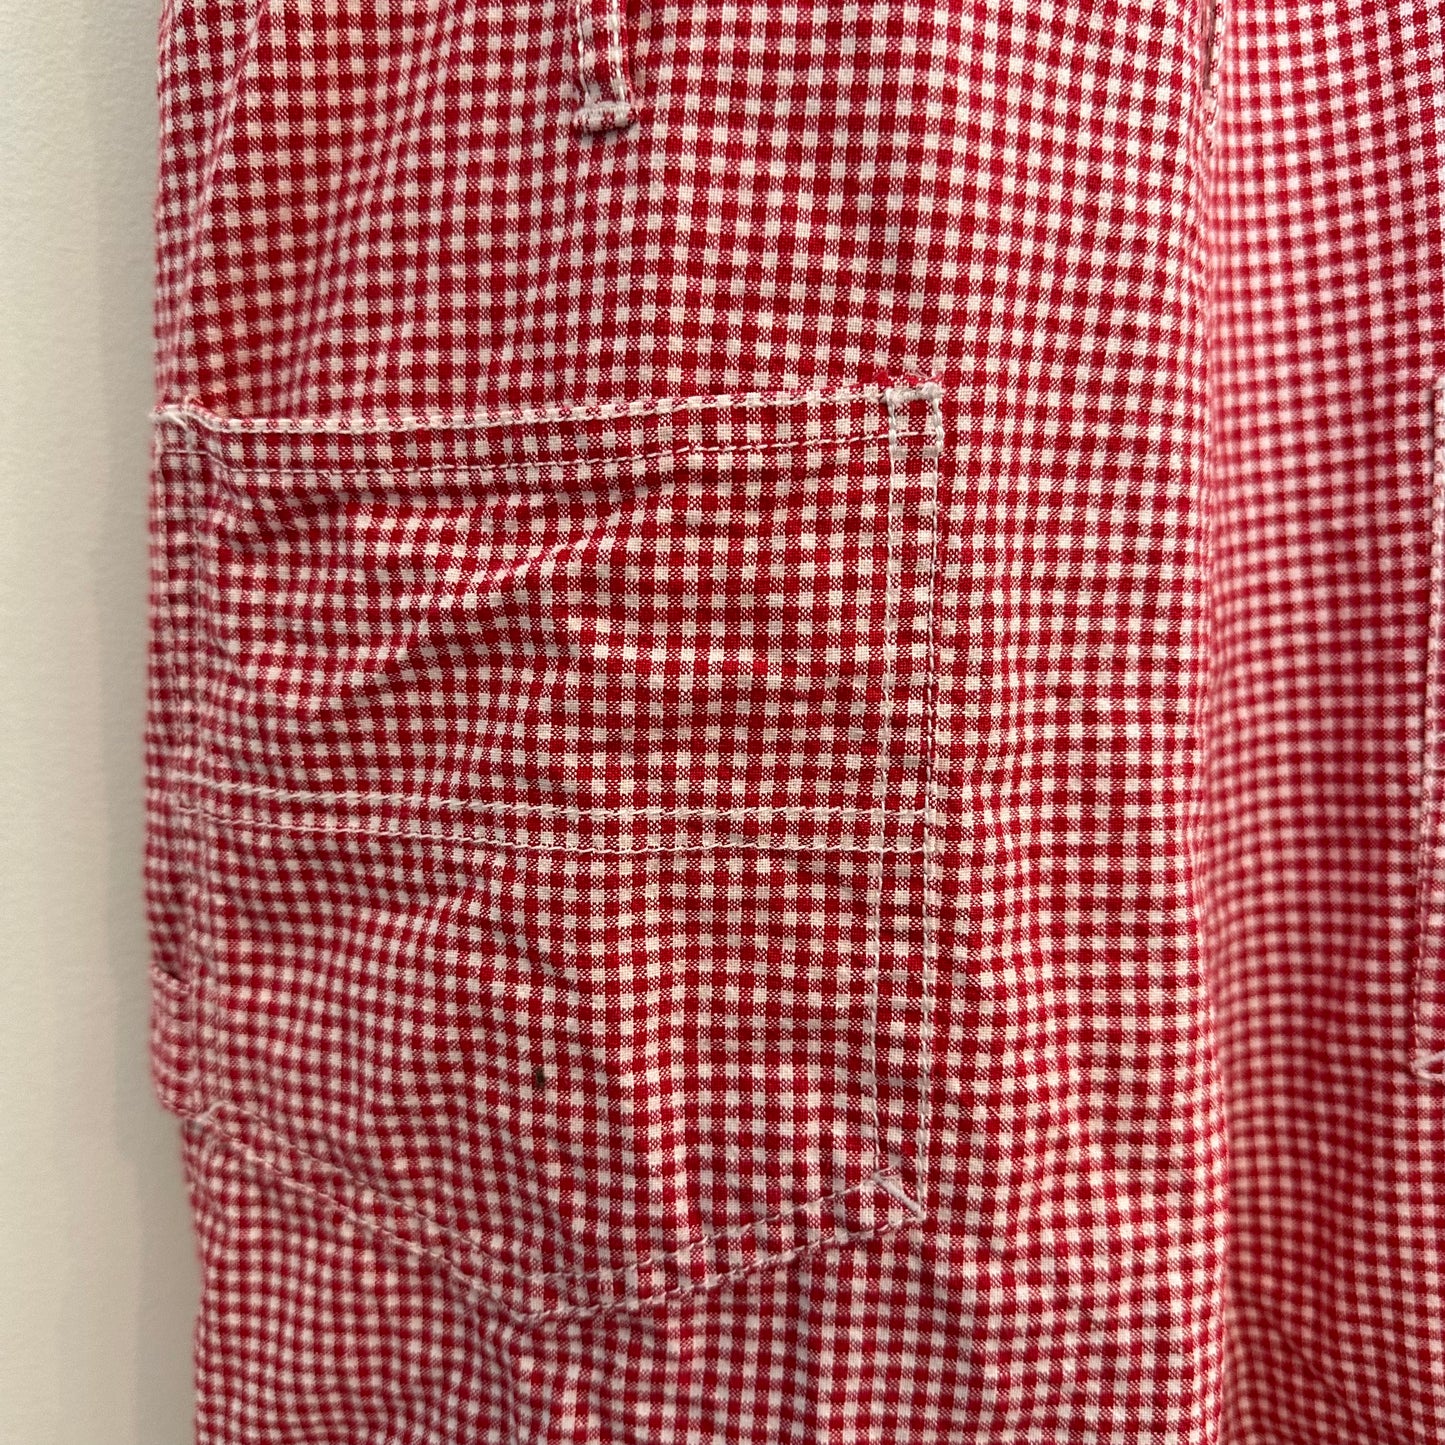 Vintage 90s No Boundaries Red Gingham Overall Shortalls Small